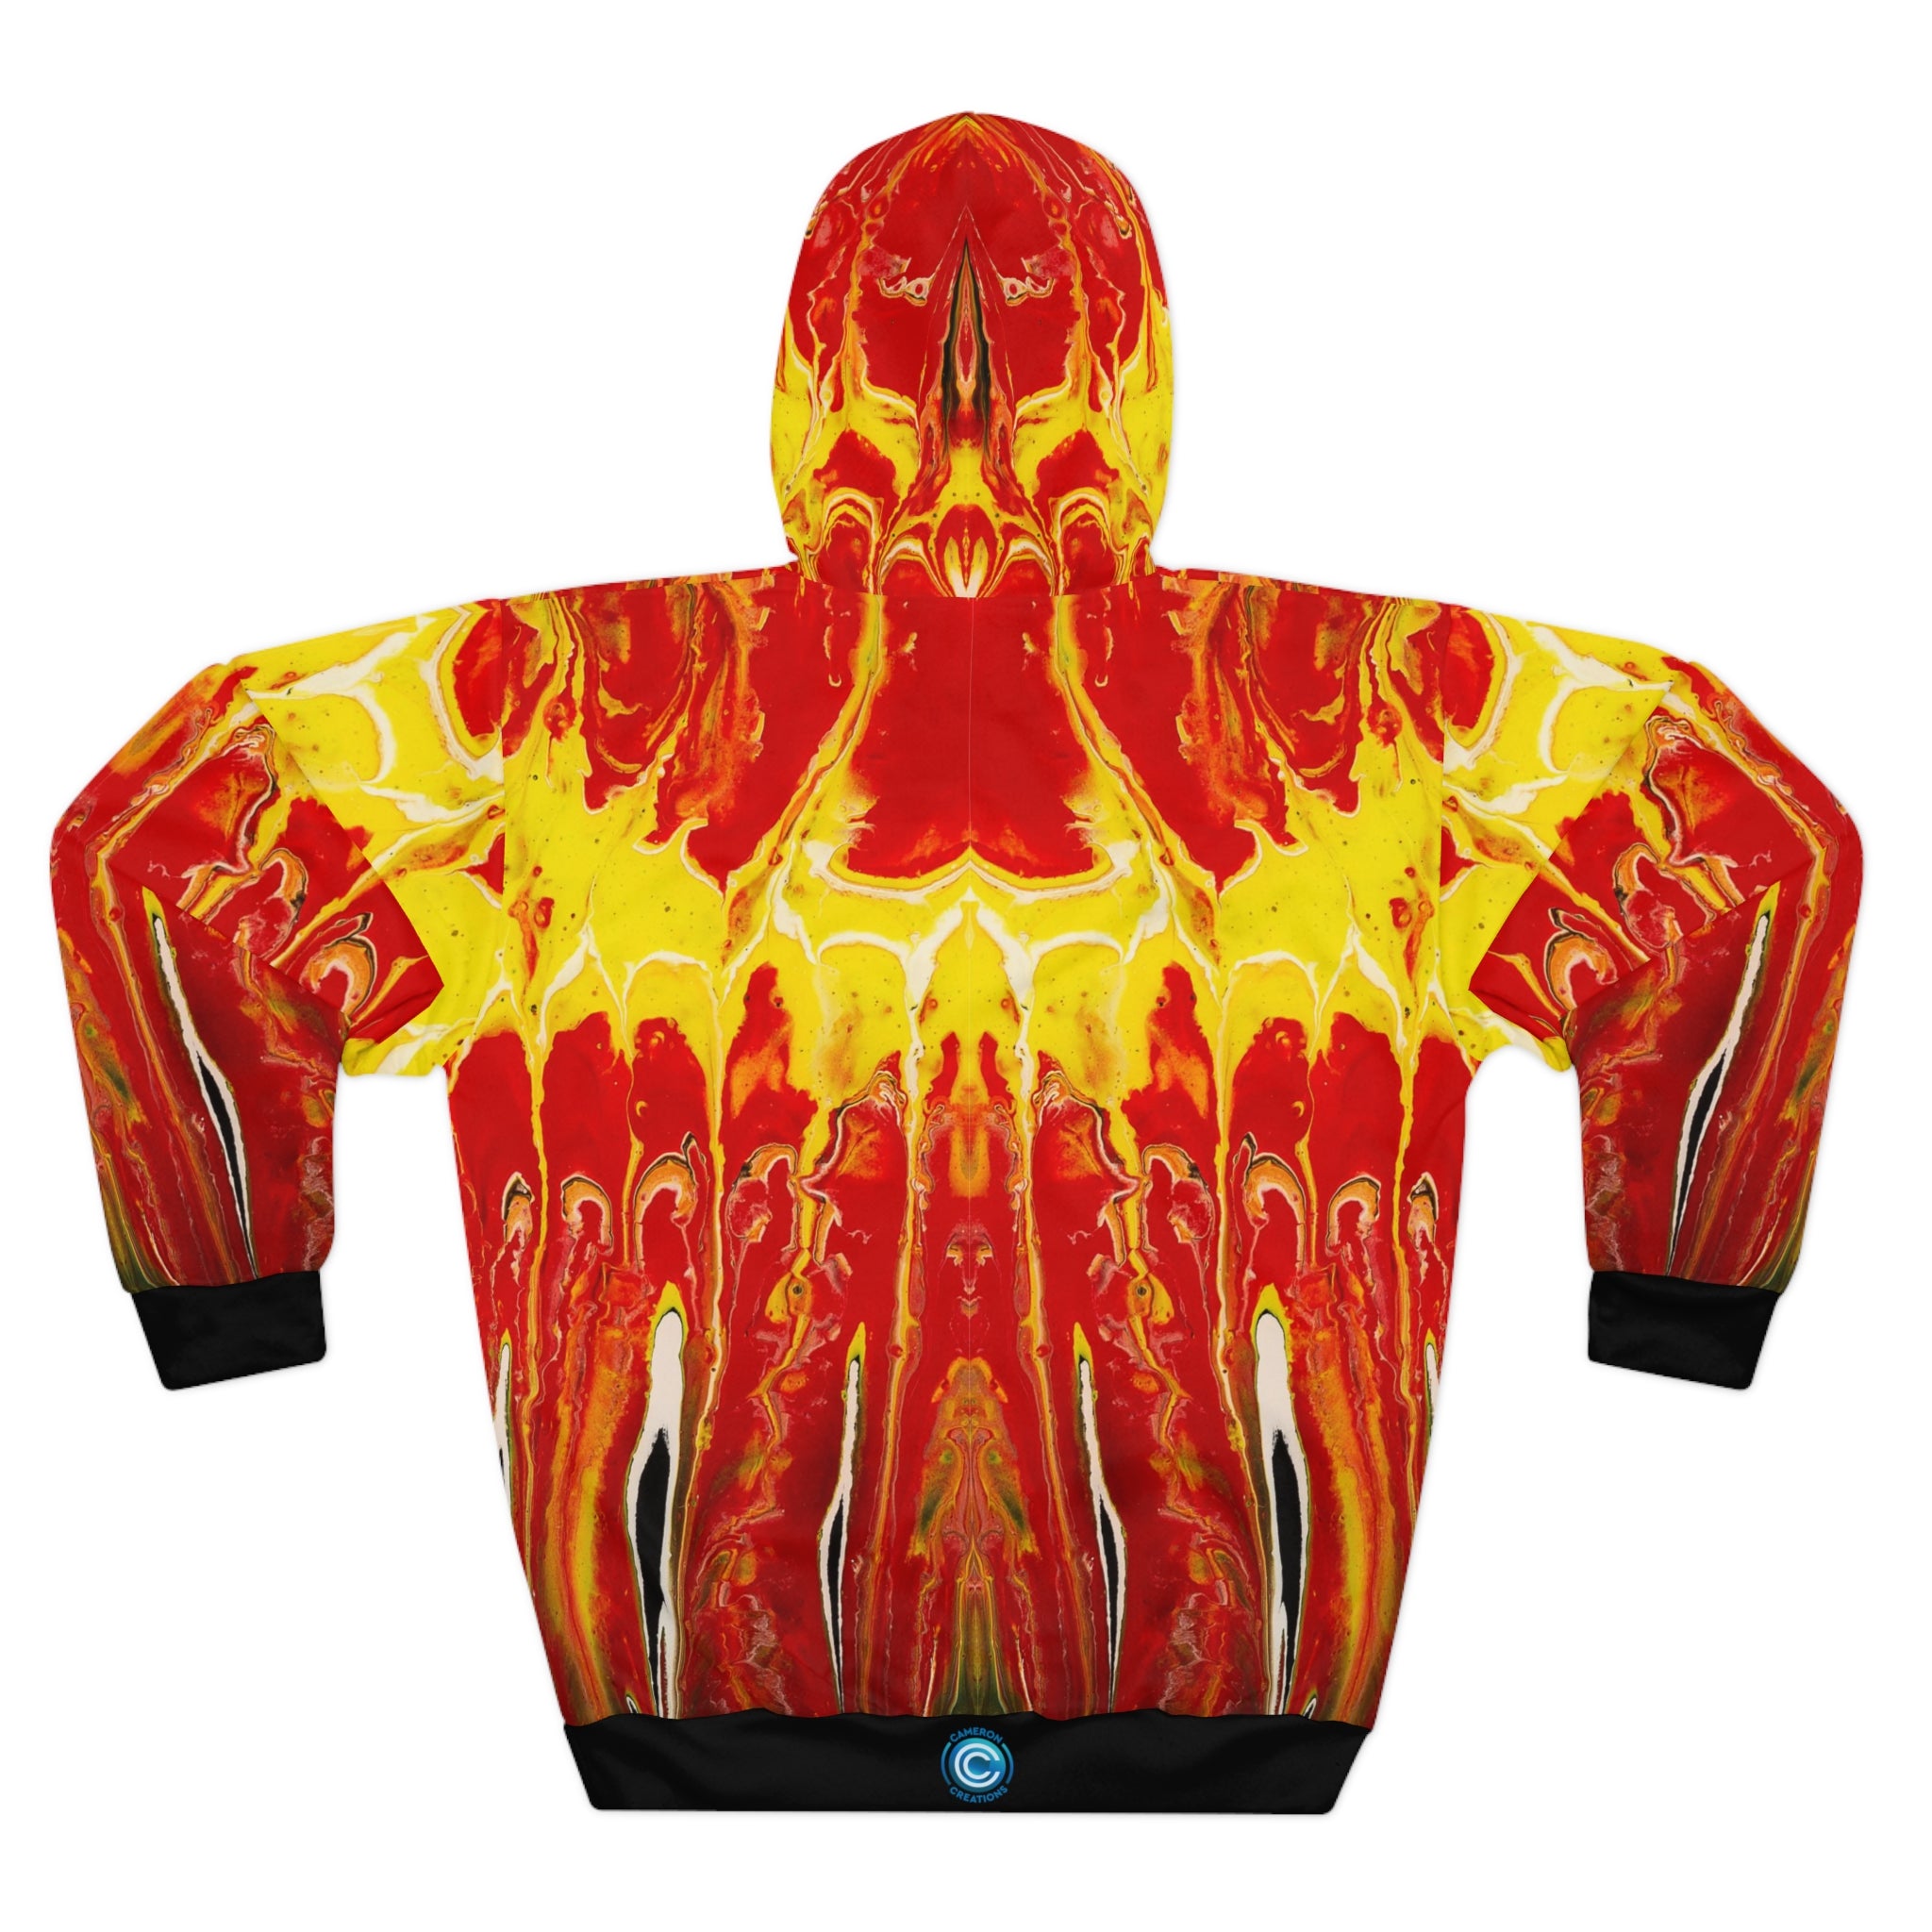 Cameron Creations - Internal Flames - Pullover Hoodie - Back